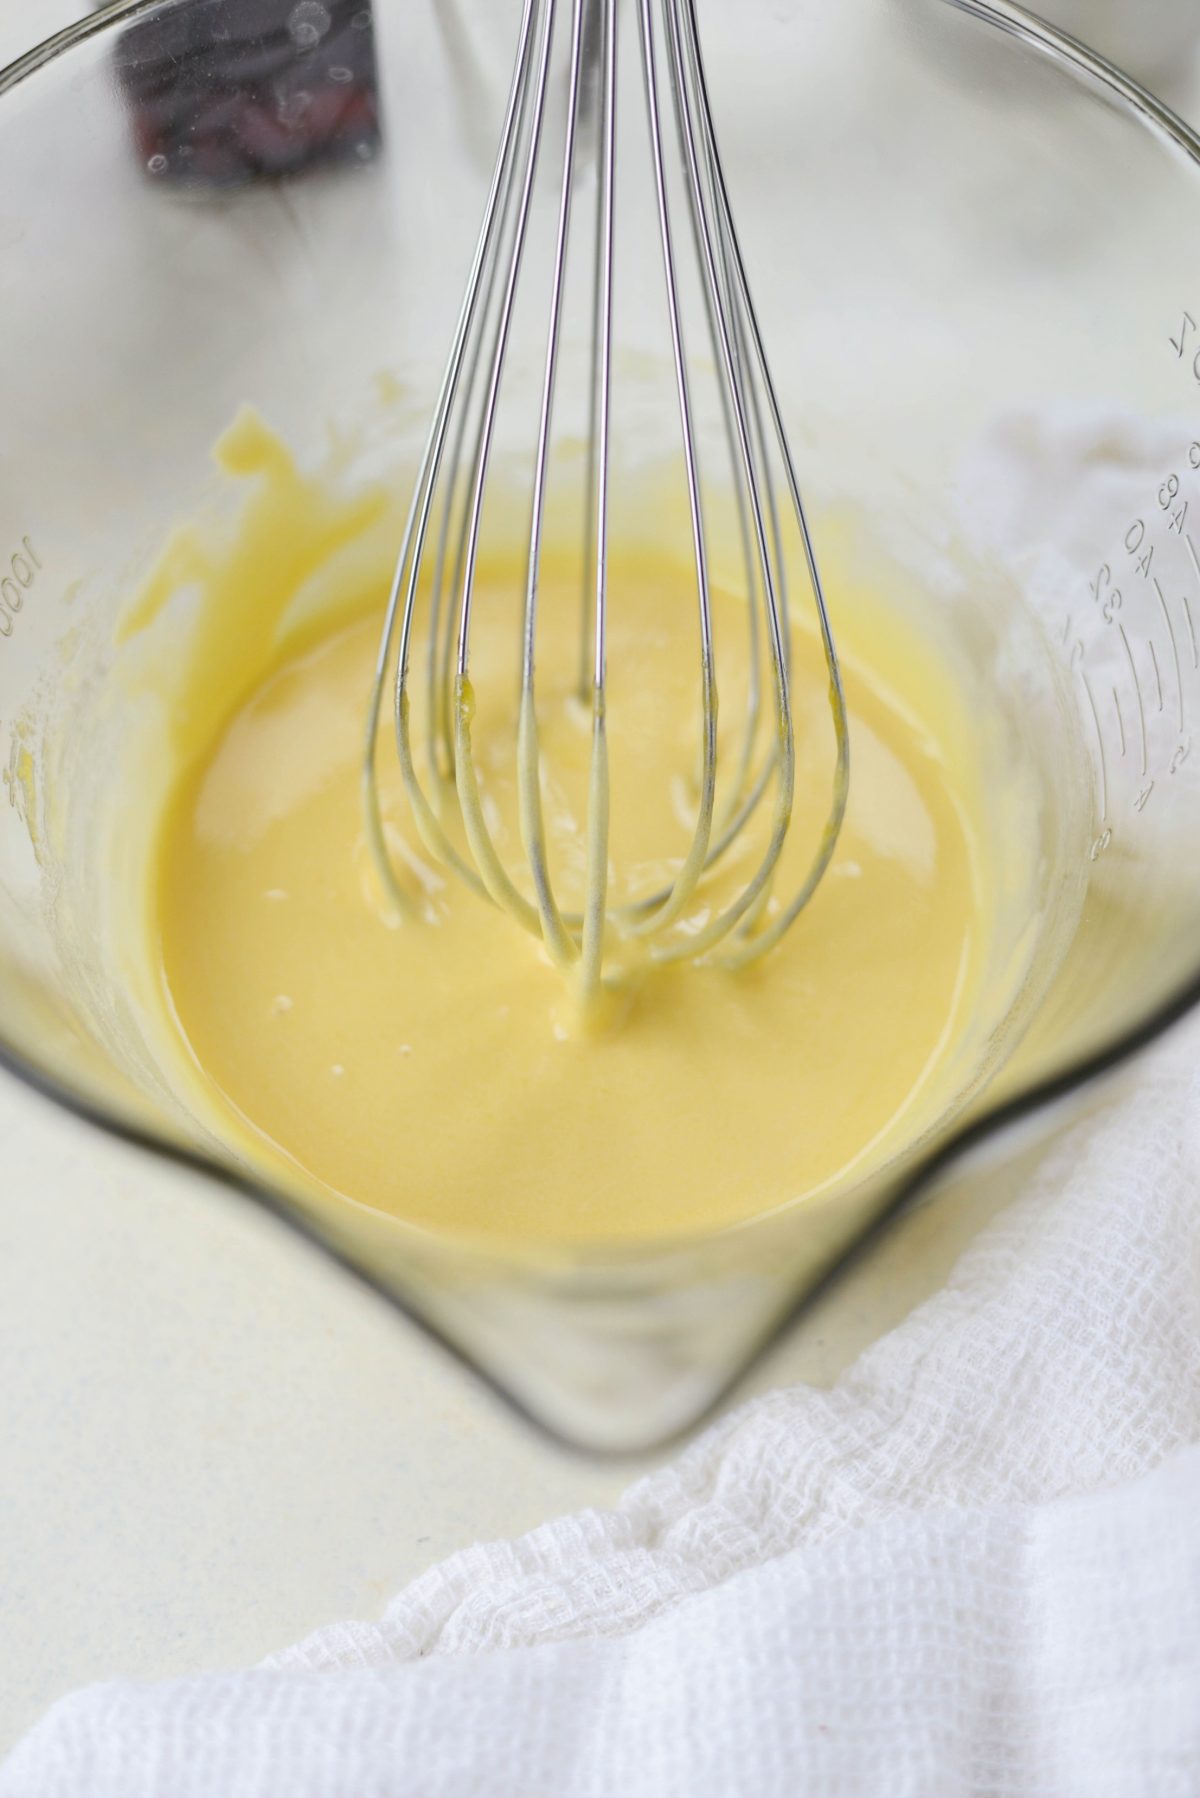 Whisk to combine and until a pale yellow in color.